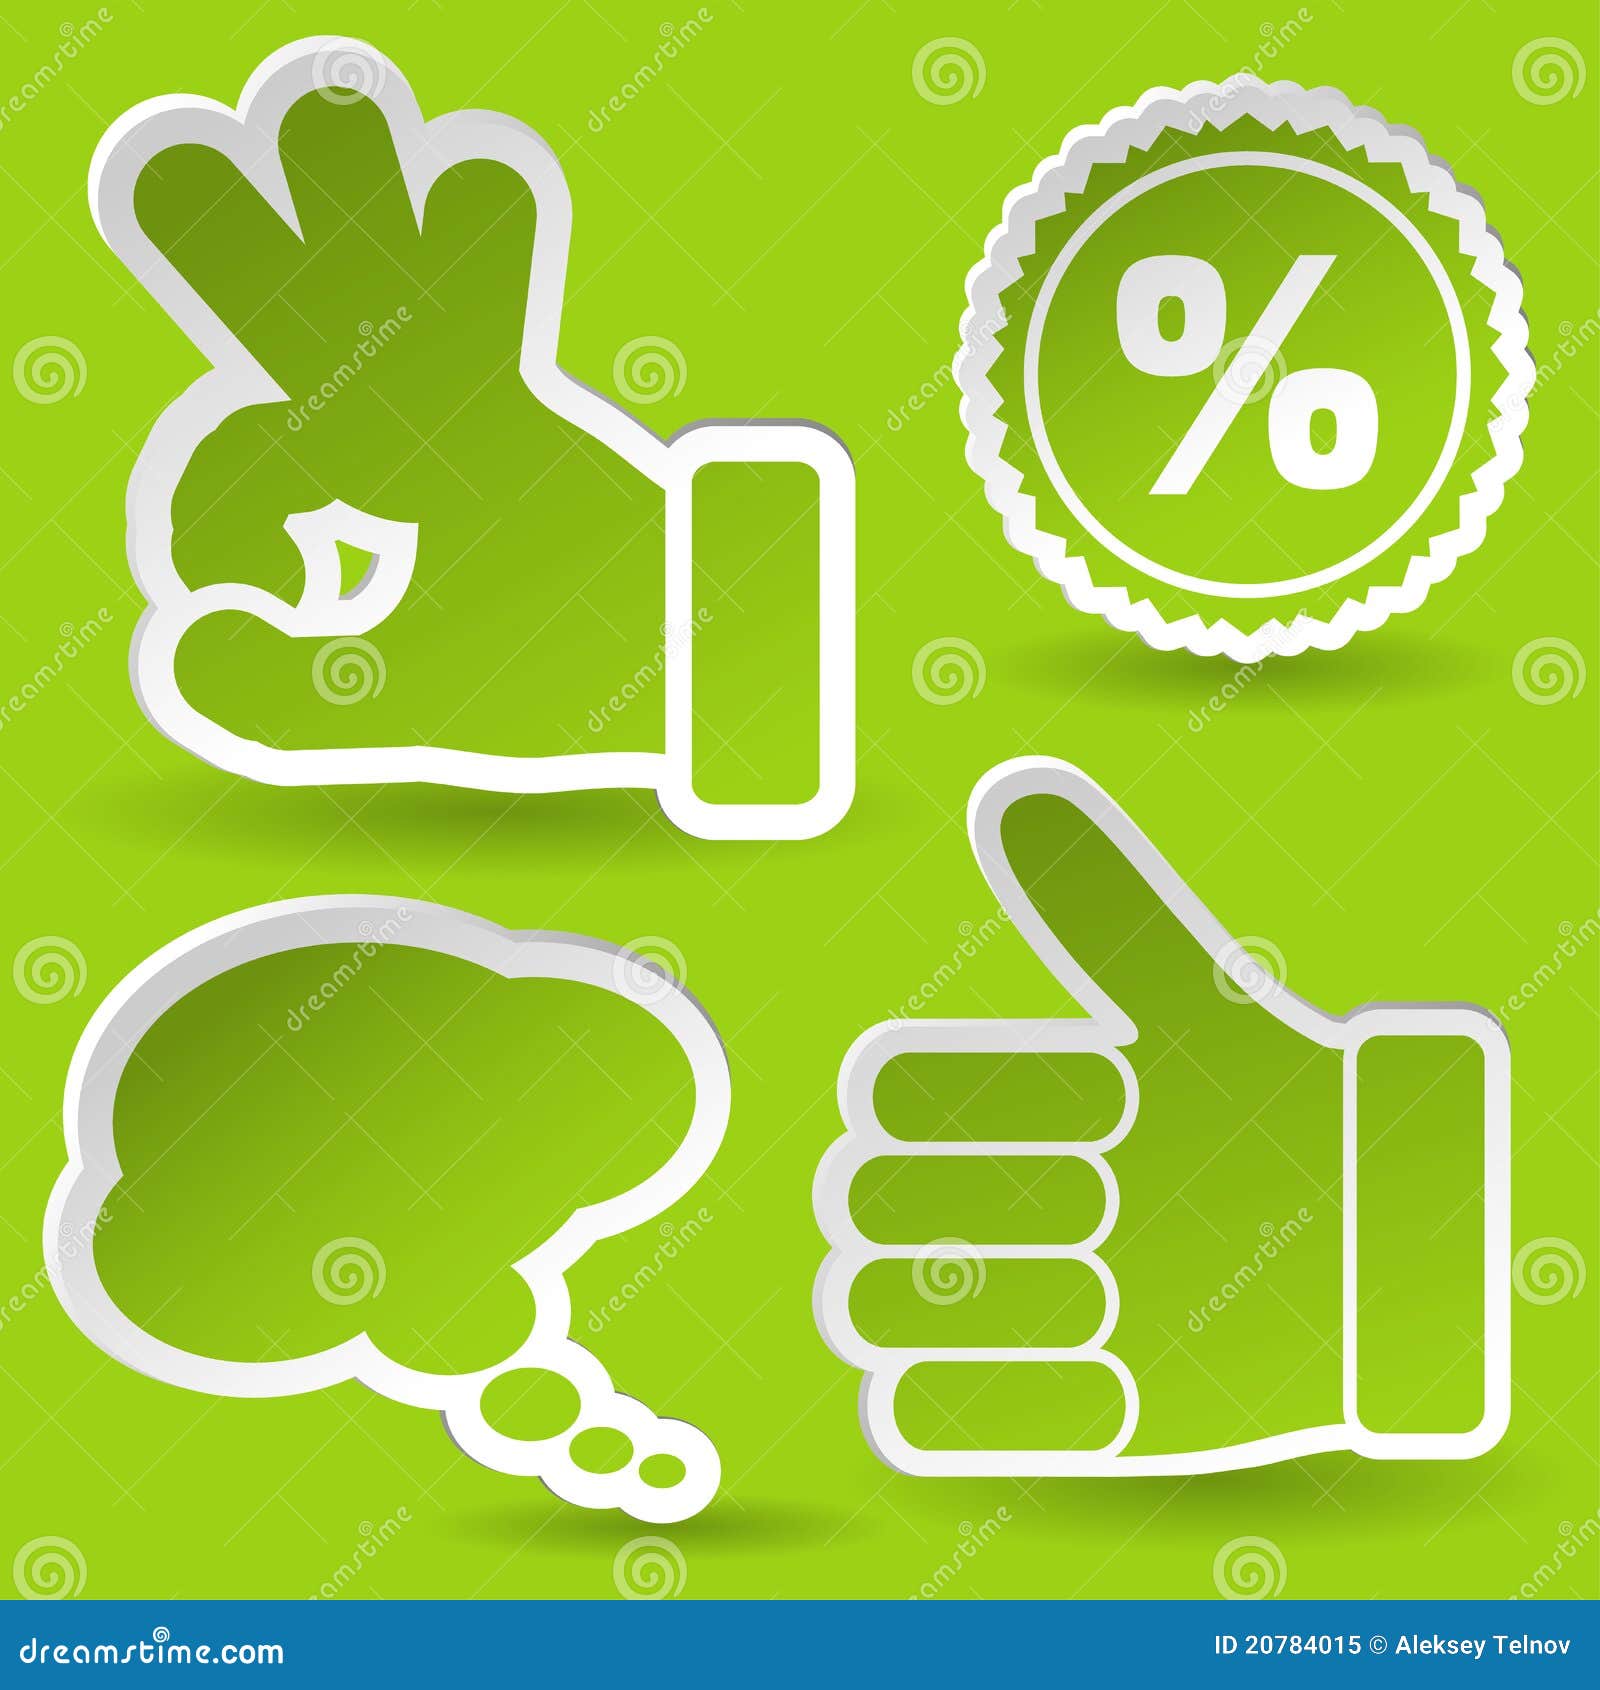 collect sticker with hand and stamp icon